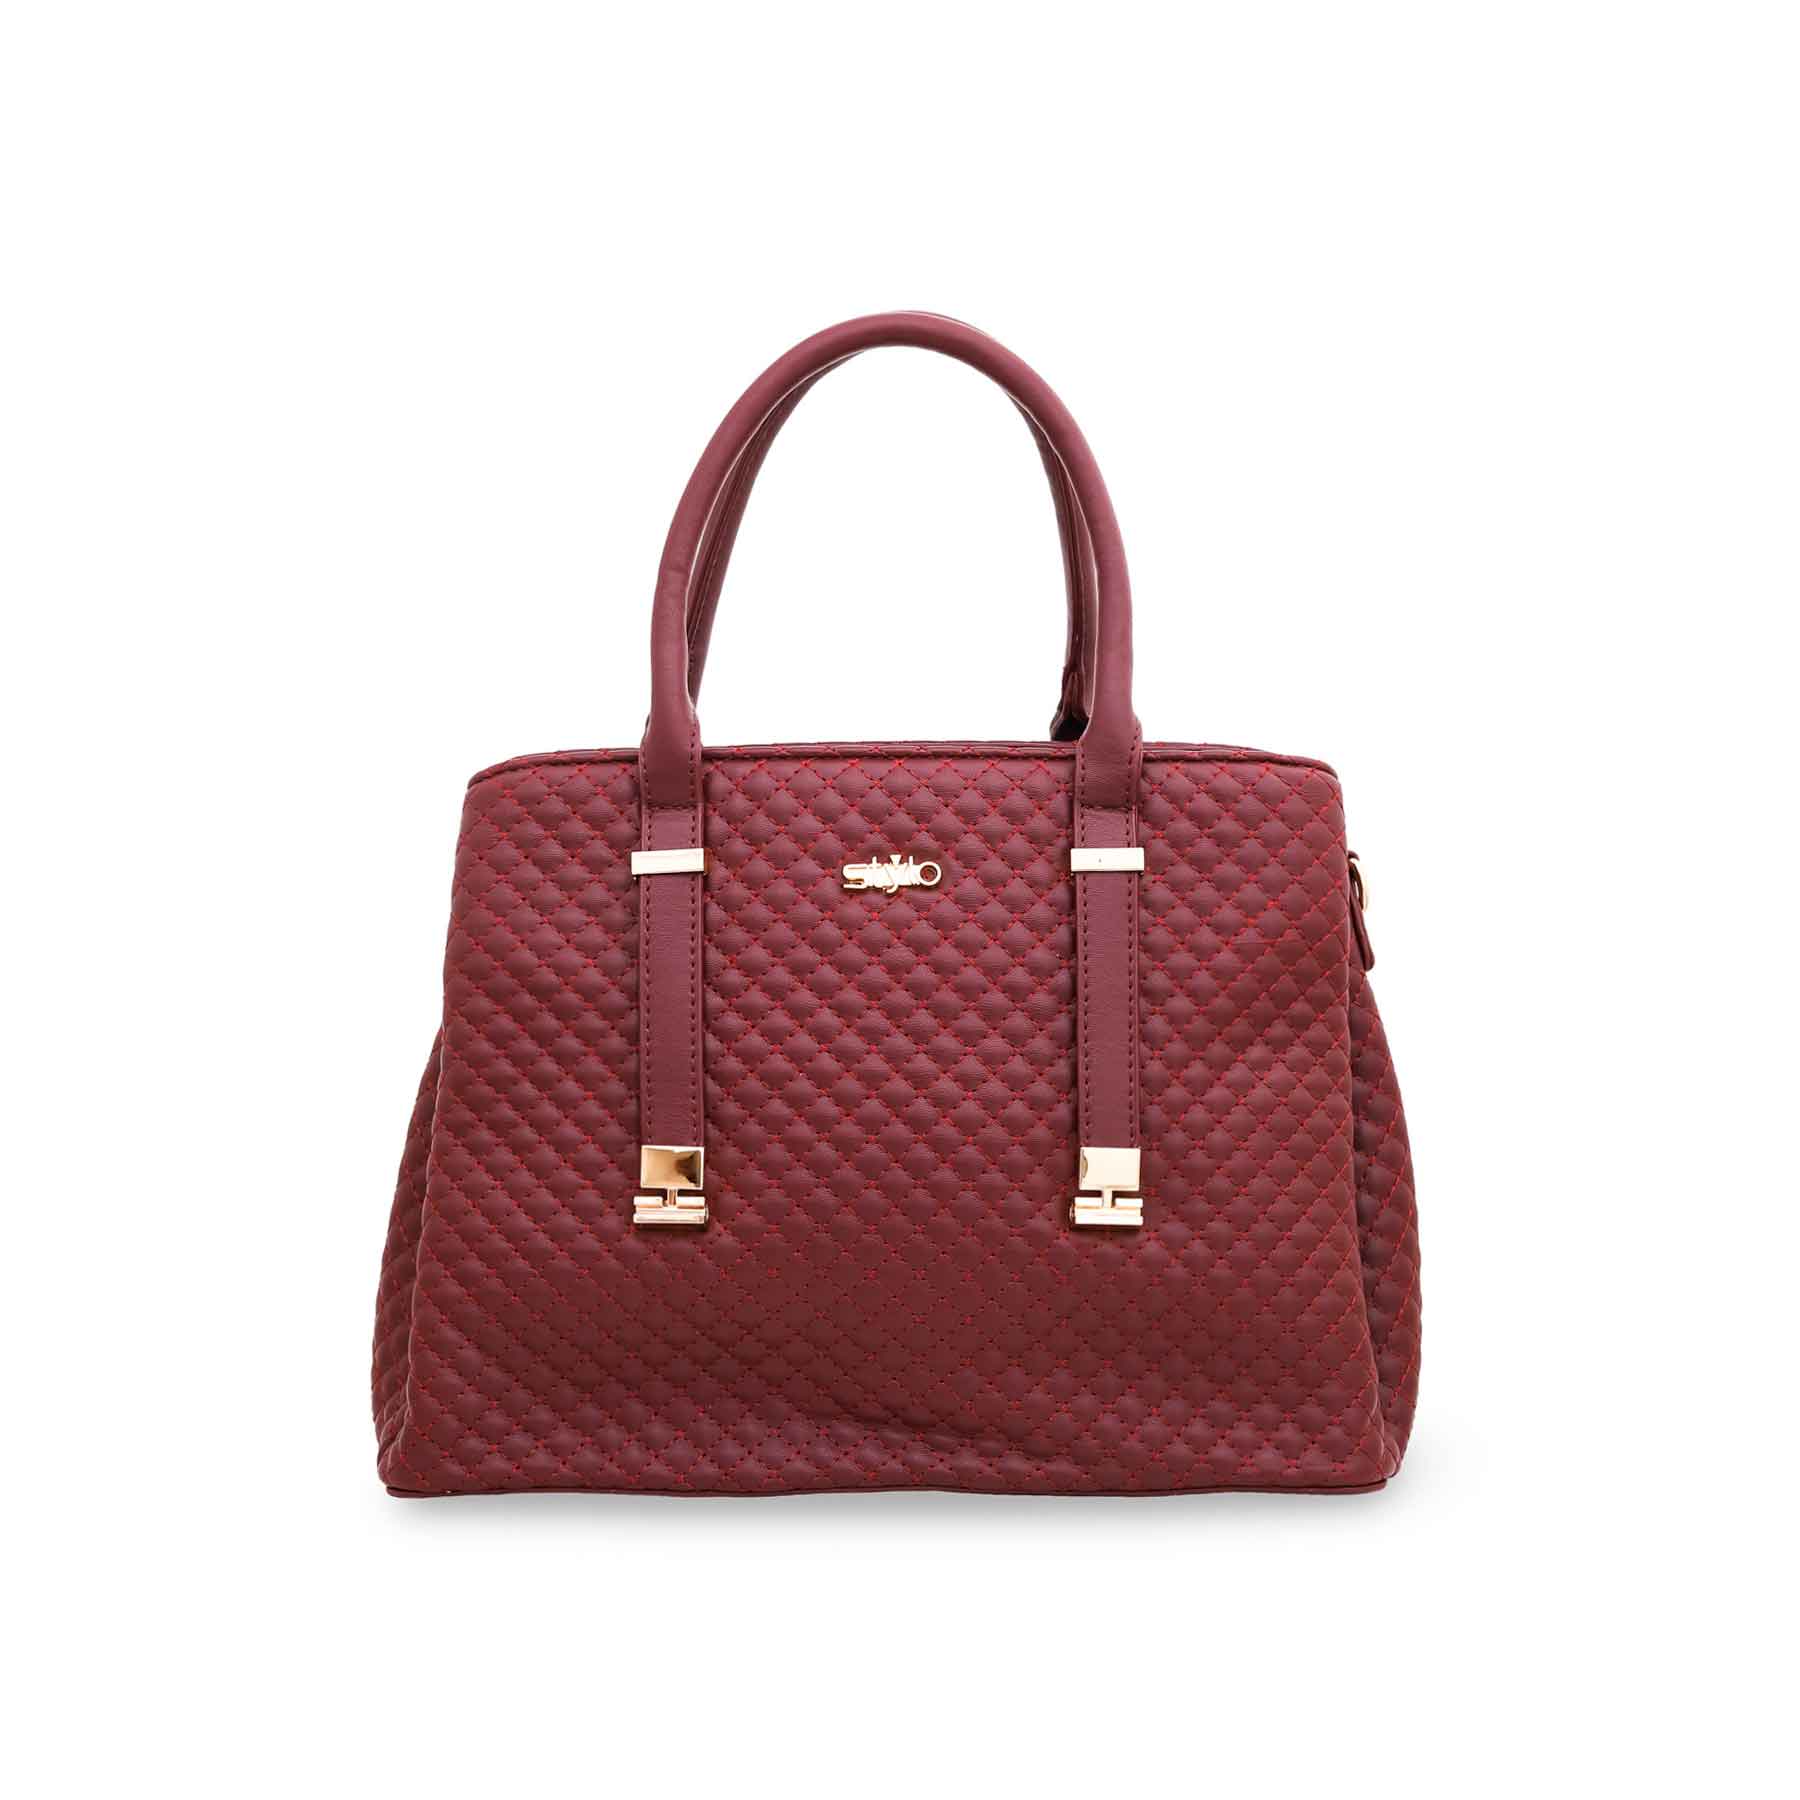 Red Formal Hand Bag P36048